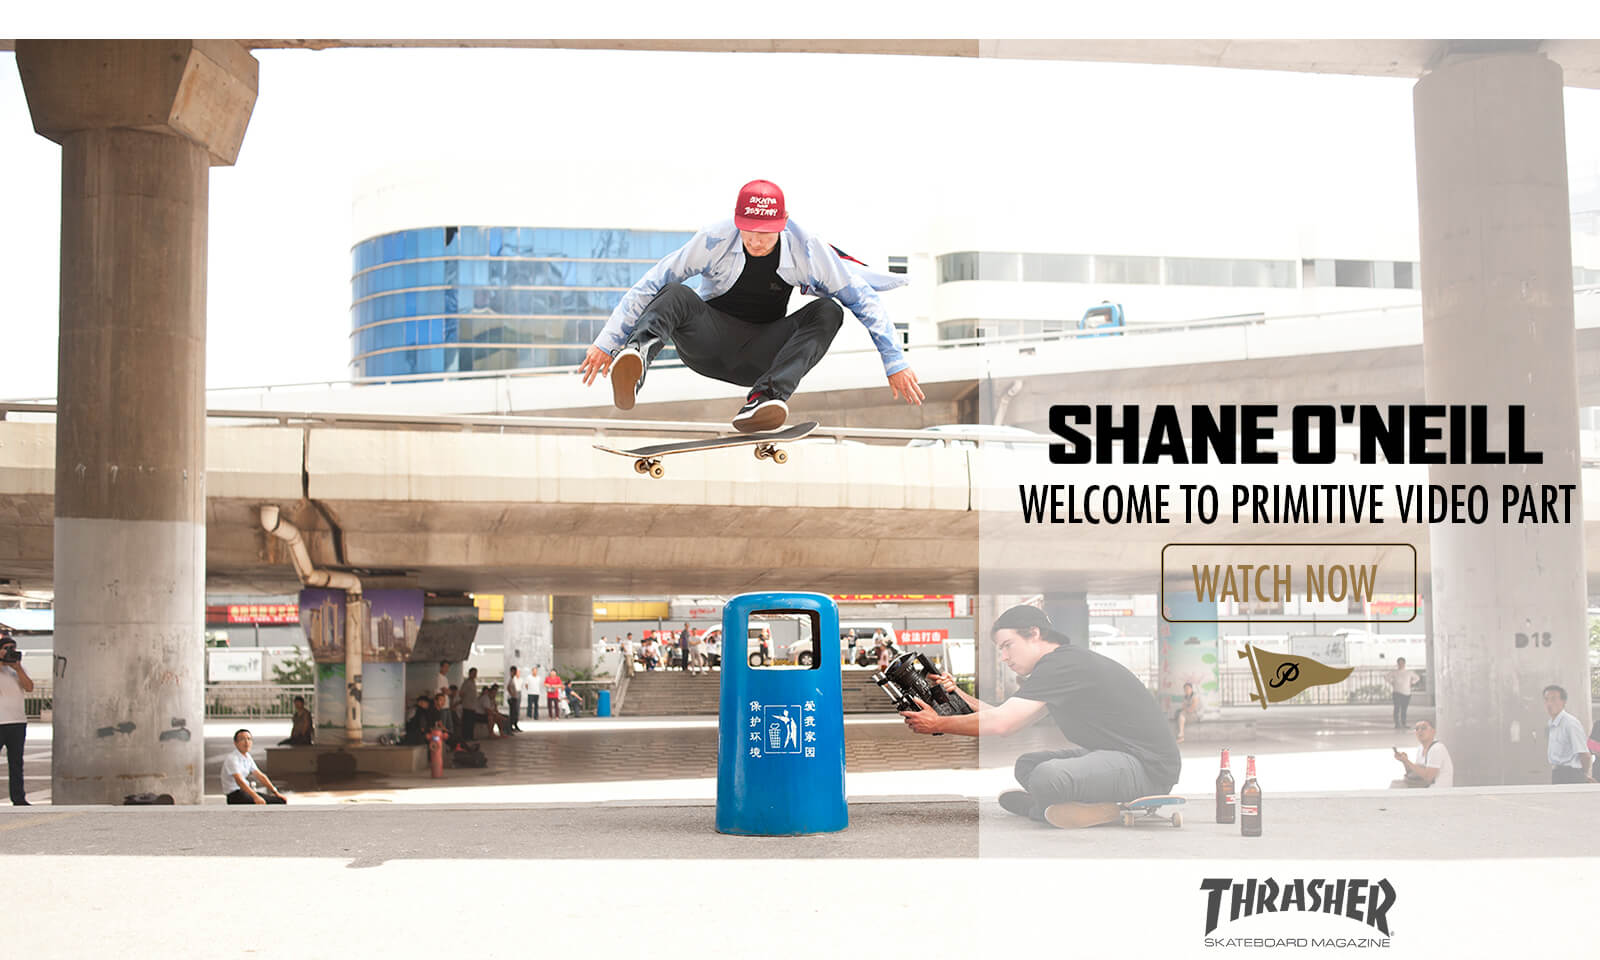 SHANE O'NEILL WELCOME TO PRIMITIVE PART